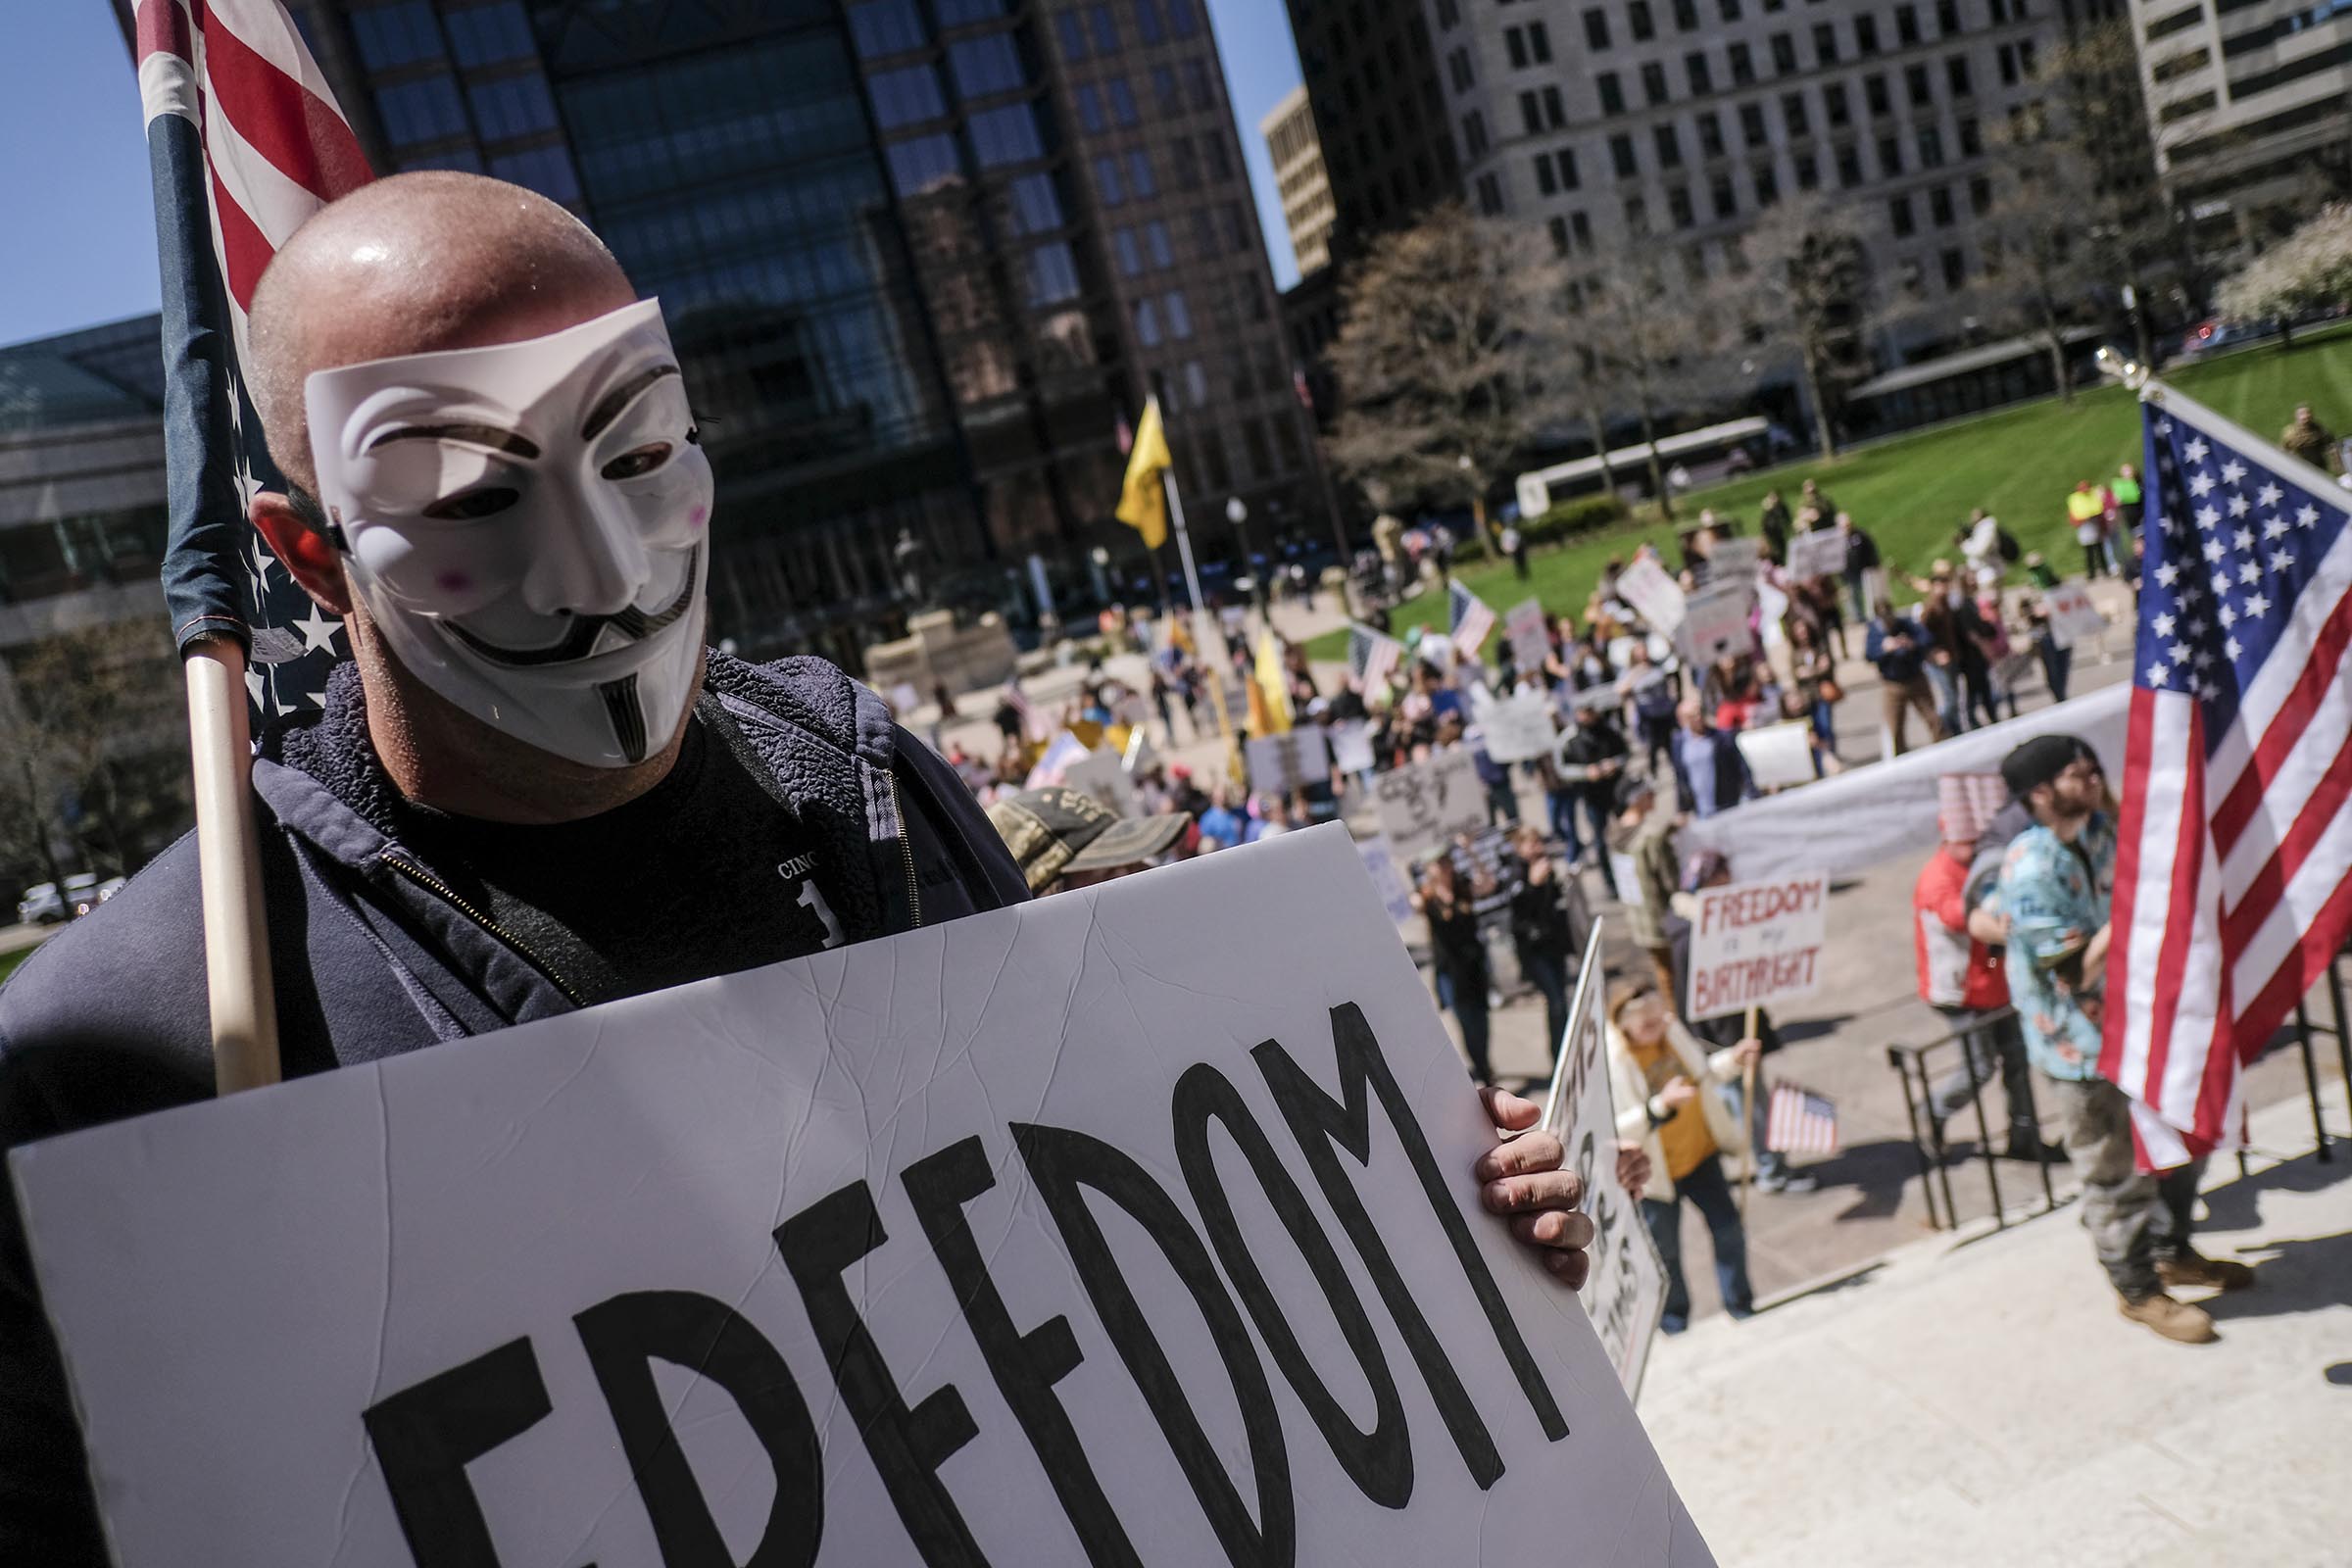 Protesters gather at the Ohio Statehouse to protest the 'Stay at Home' order on April 20, 2020 in Columbus, Ohio. (Matthew Hatche—Getty Images)